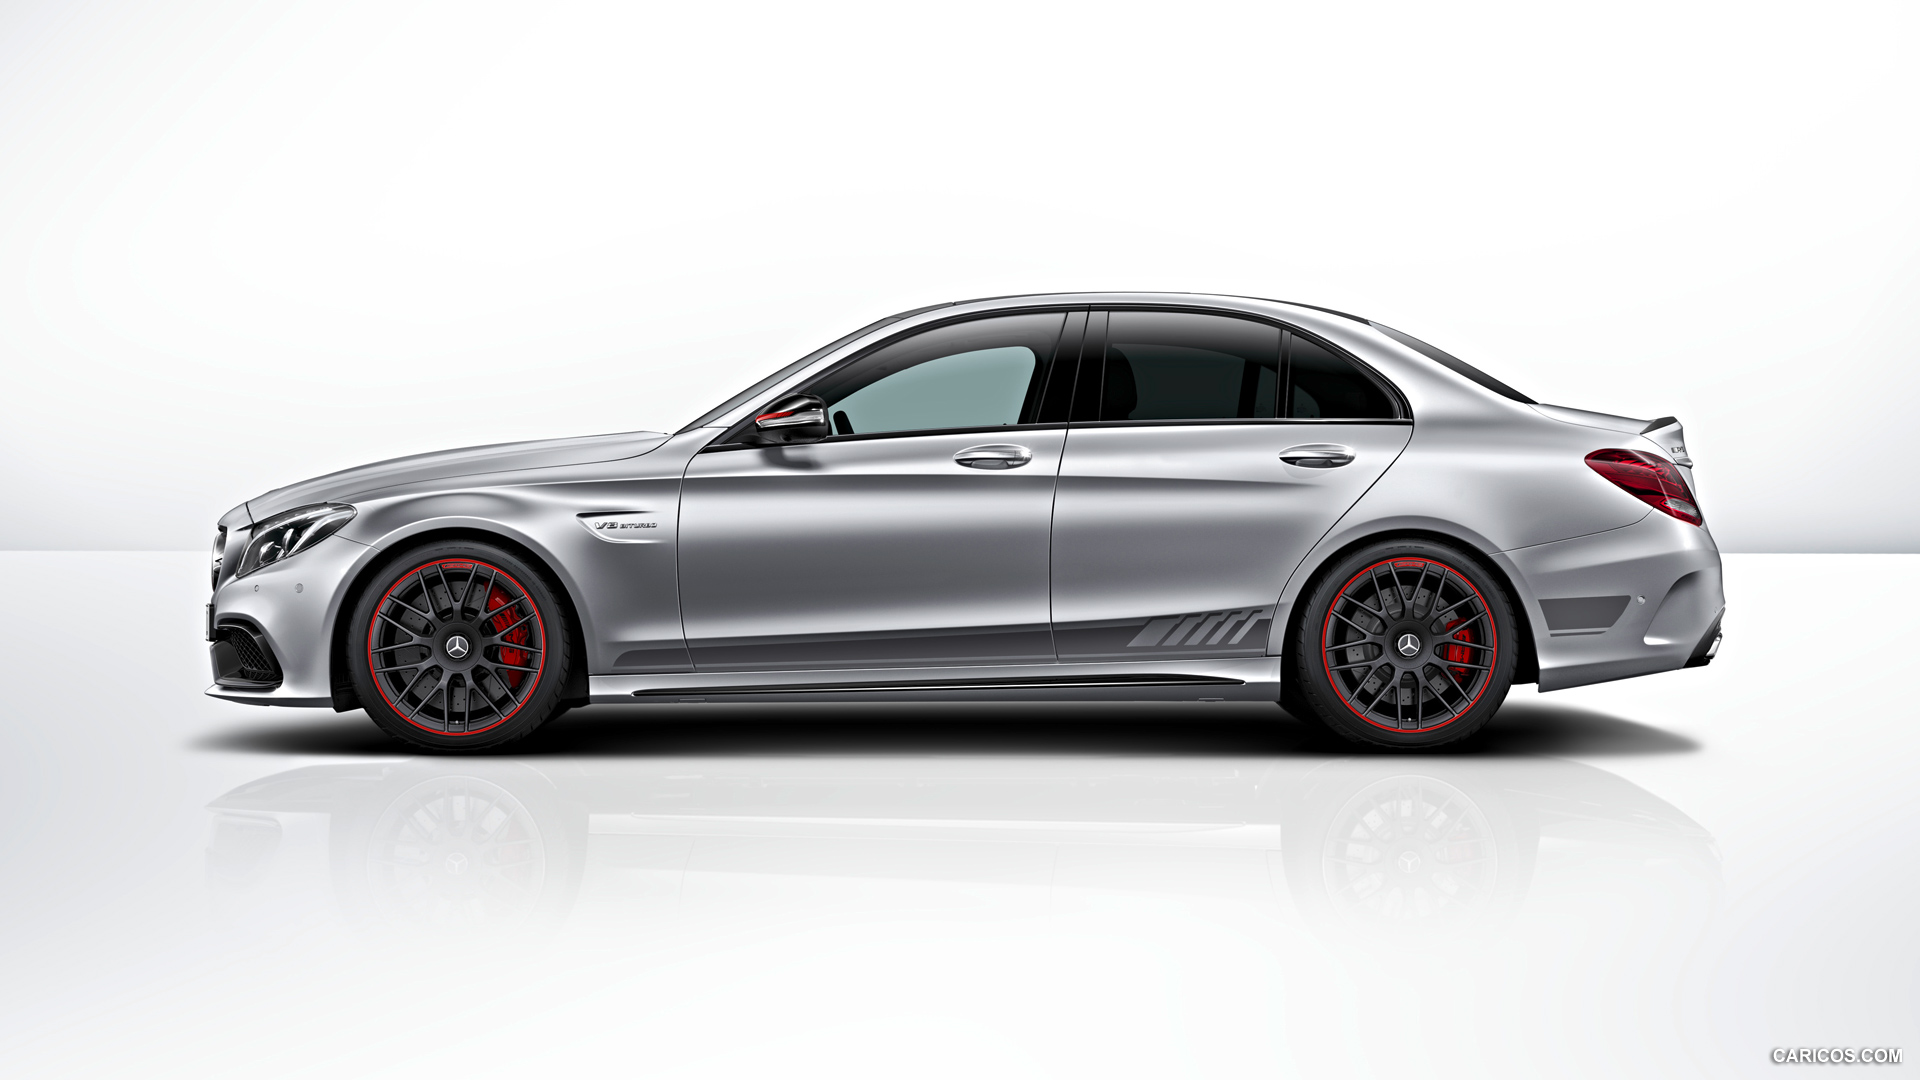  2015 Mercedes-Benz C63 AMG Edition 1 - Side, #3 of 13